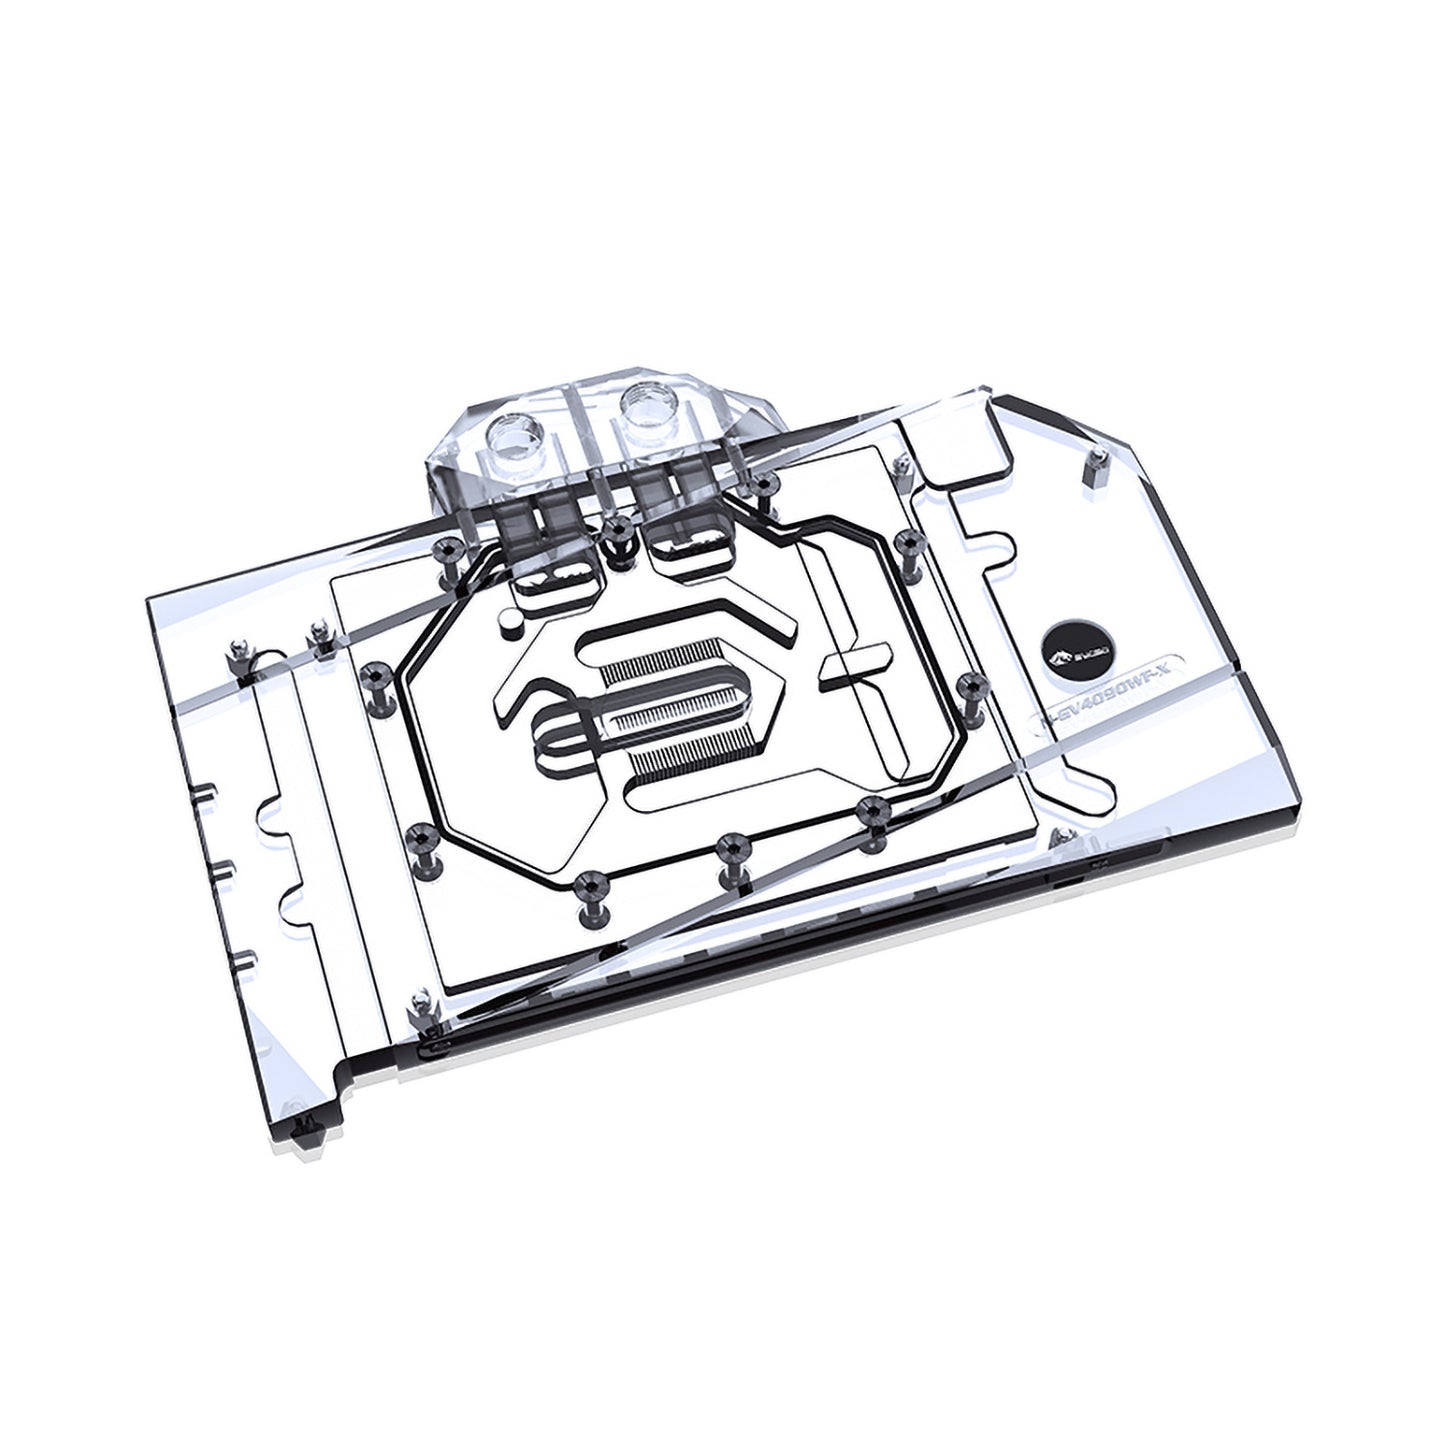 Bykski GPU Water Block For Gigabyte RTX 4090 Windforce / Aorus RTX 4090 Xtreme Waterforce, Full Cover With Backplate PC Water Cooling Cooler, N-GV4090WF-X